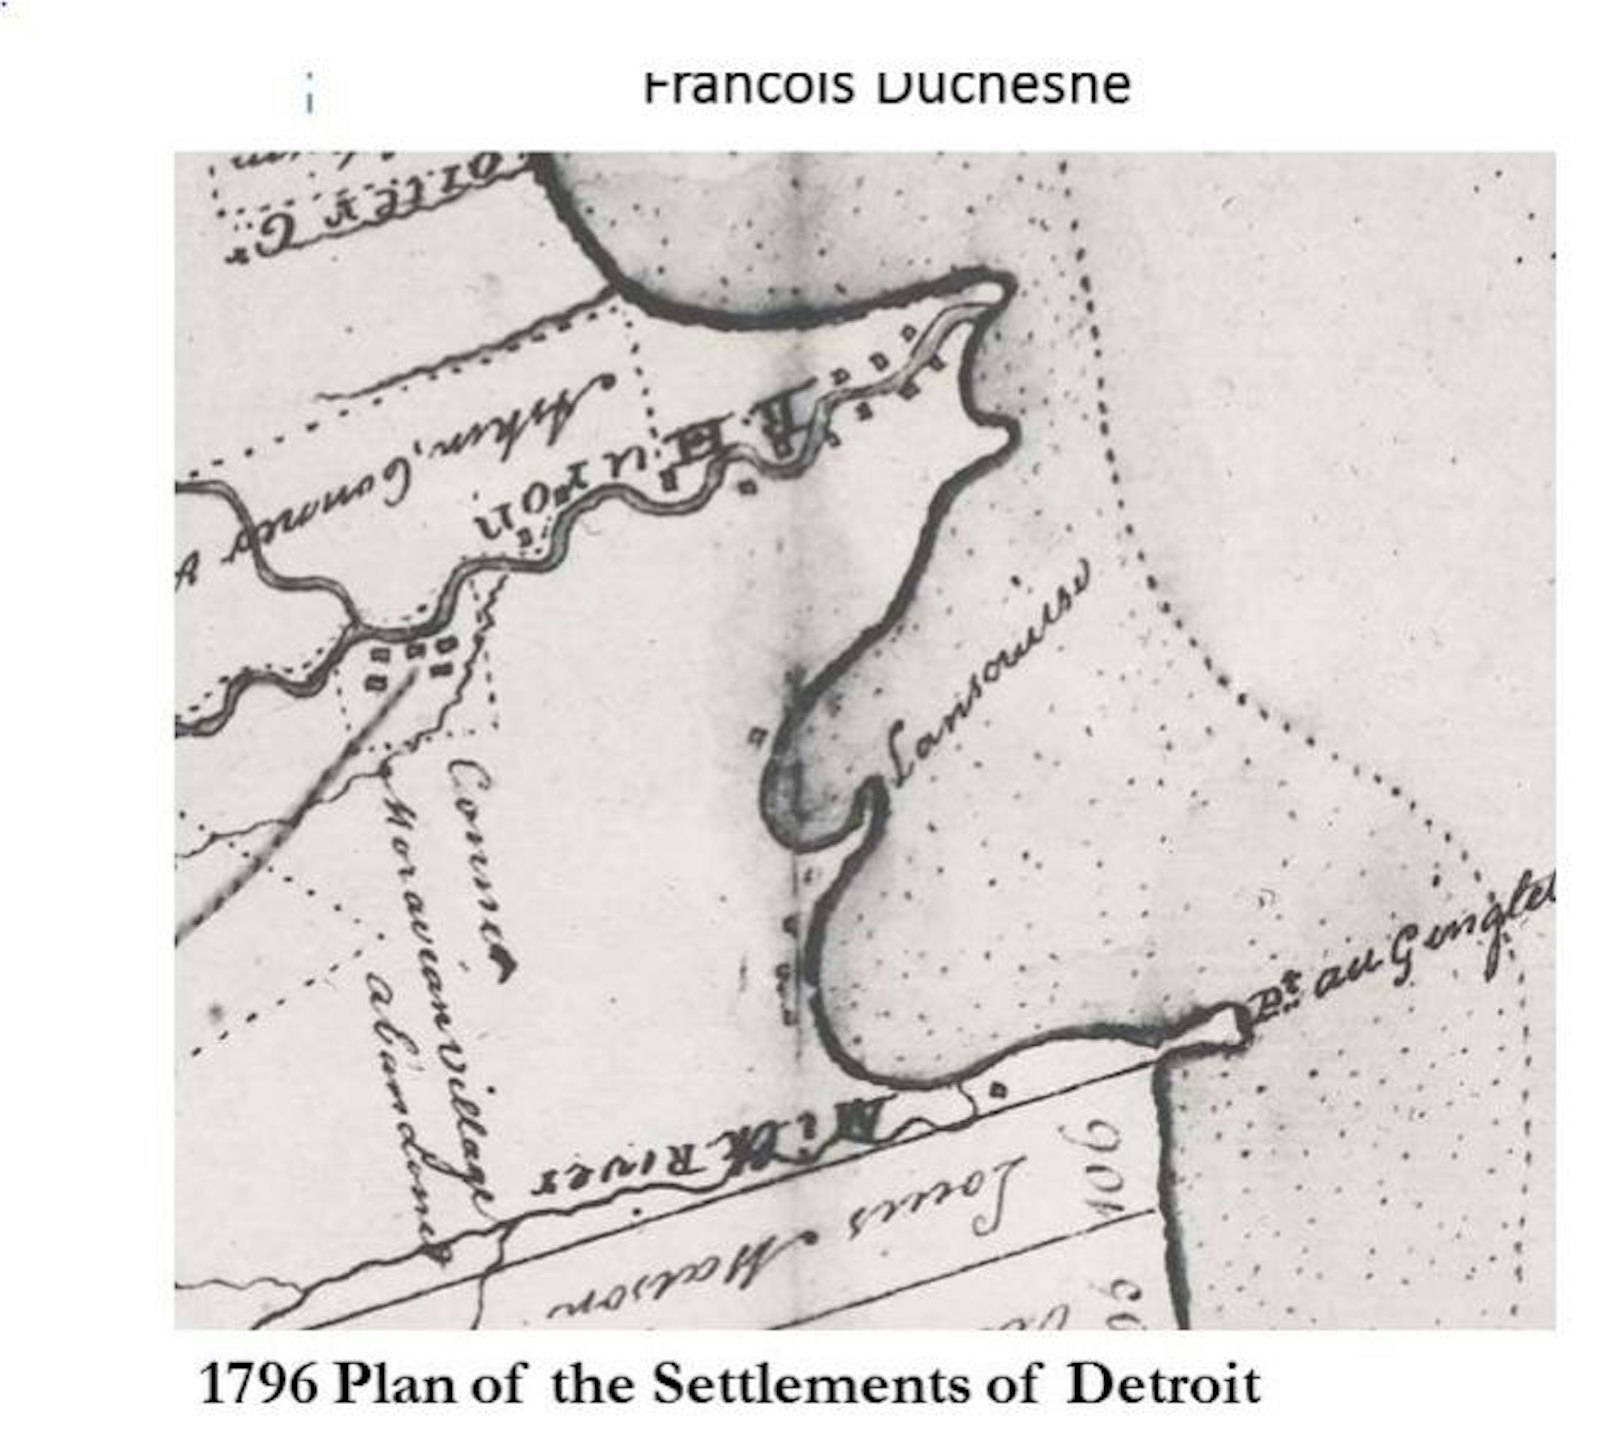 The “spit” of land sticking out of the Lake St. Clair shoreline where historians think St. Felicity Mission was located. Building the church on the “spit” made it more easily accessible for boats. However, by the 1850s, the spit no longer existed on most maps. (Courtesy Macomb County)